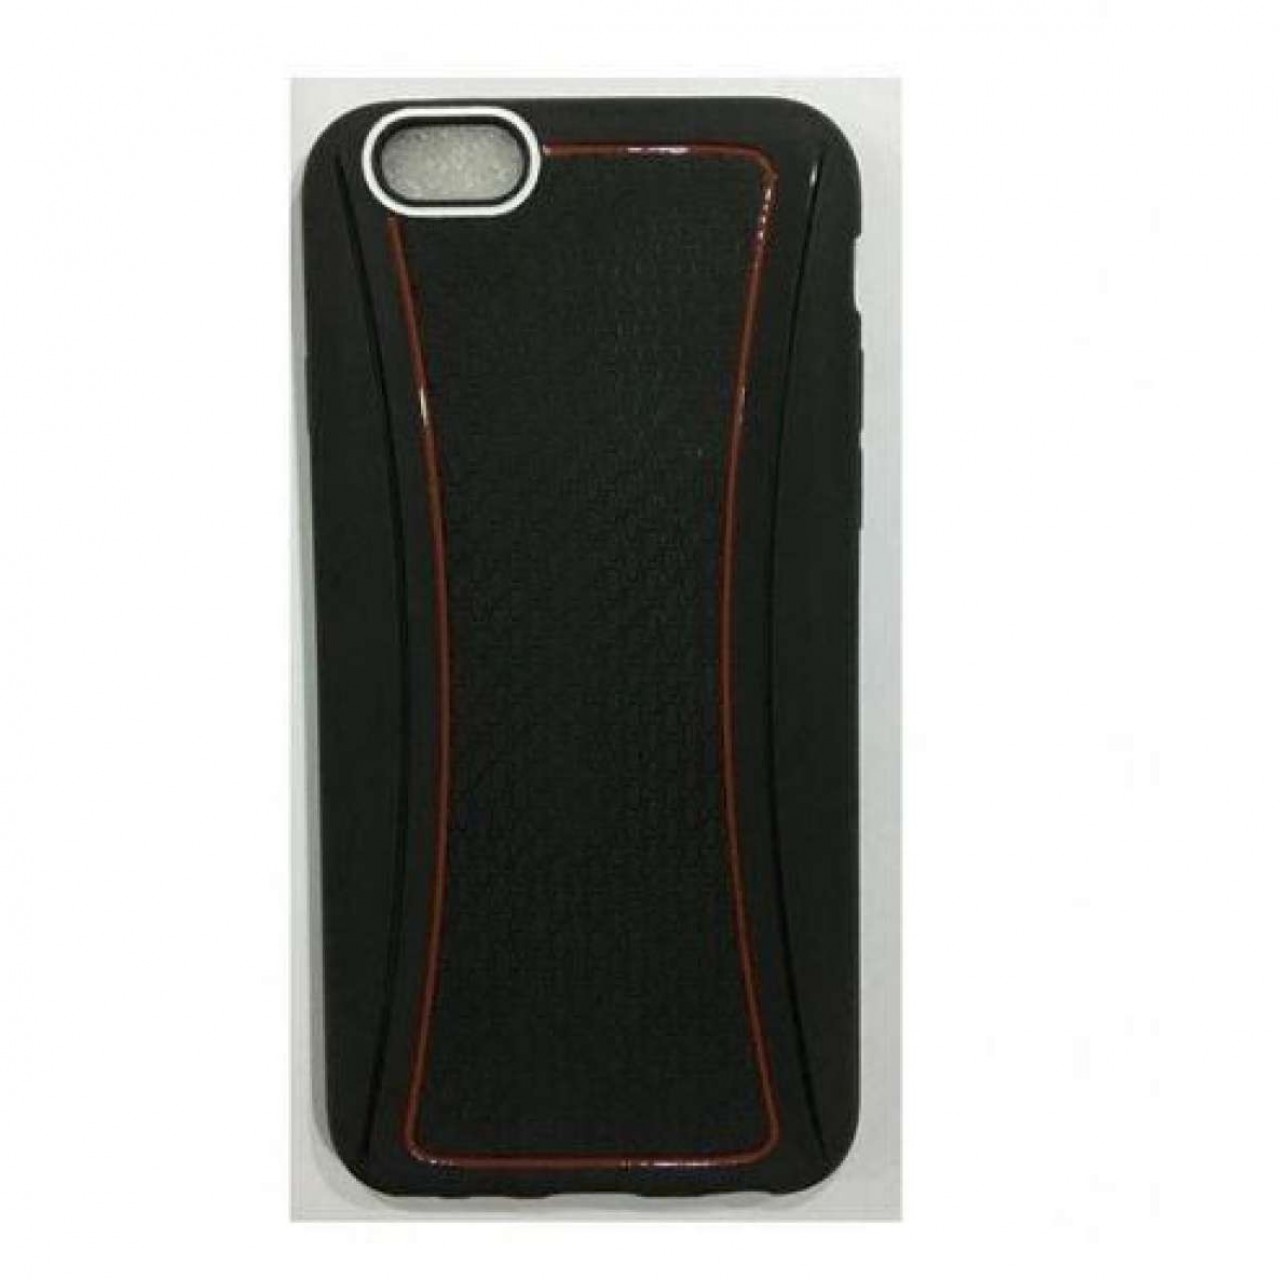 Back Cover for iPhone 6 - Black